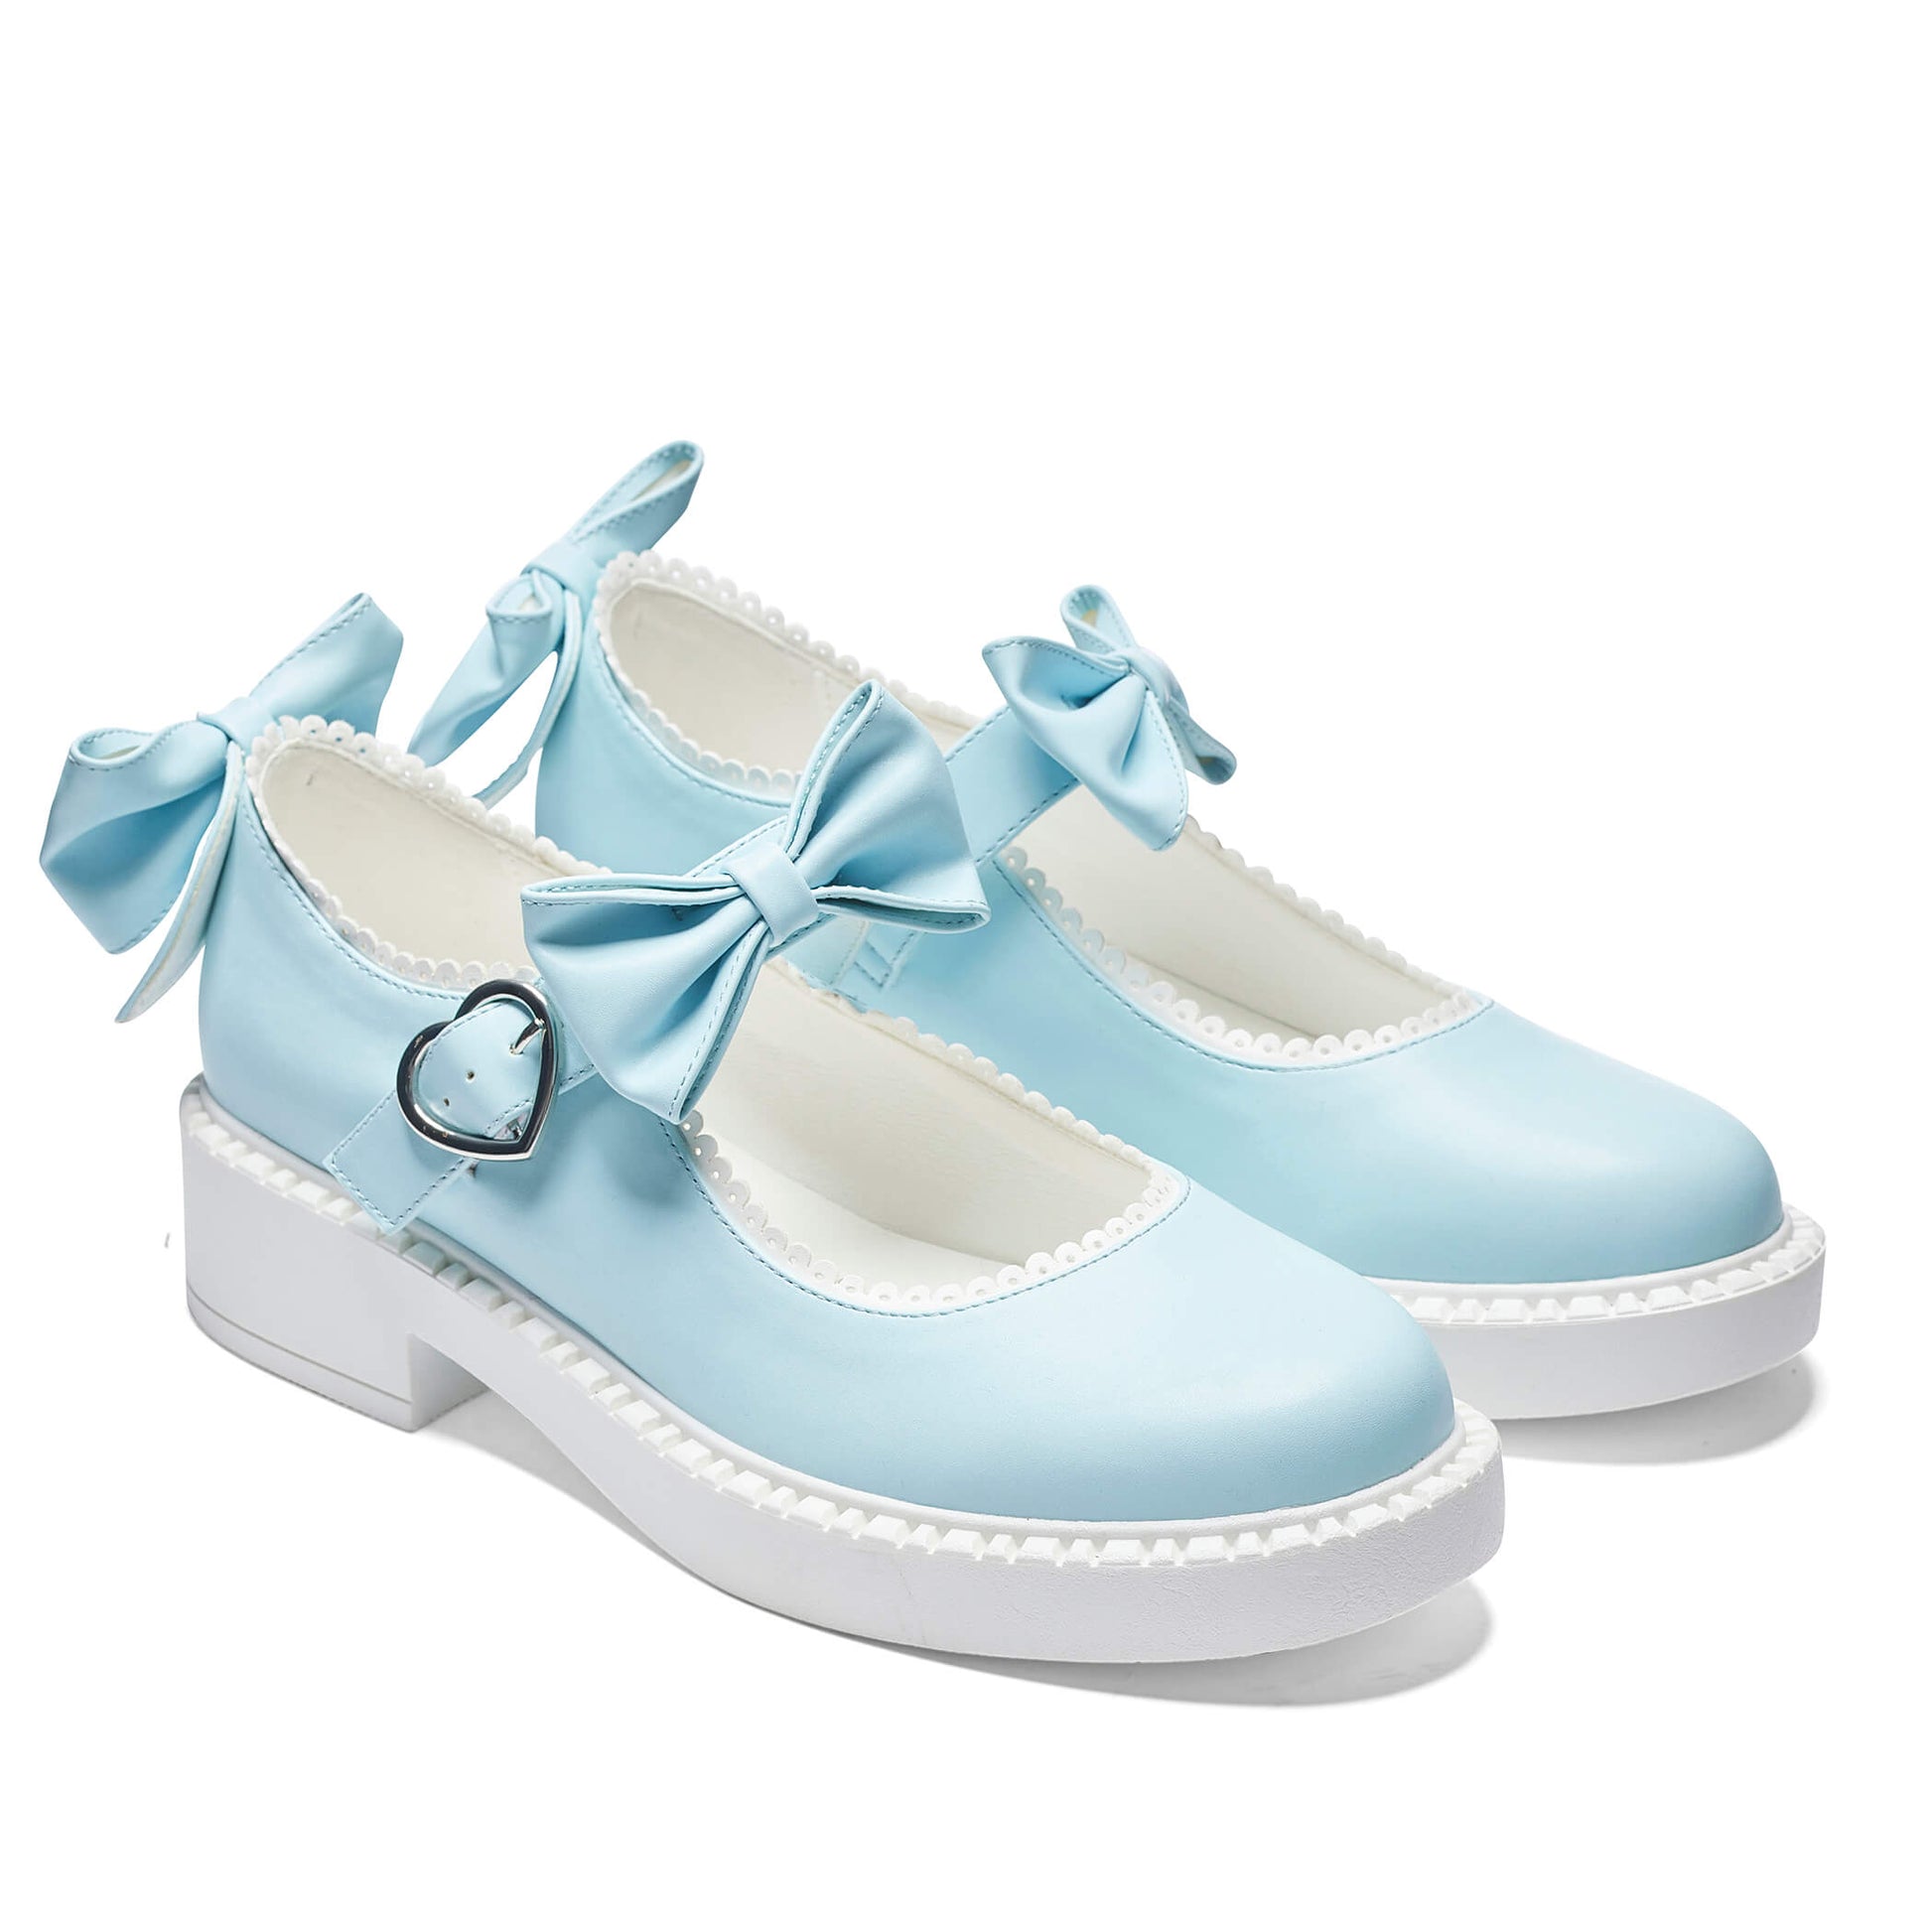 Fairy Lace Doily Mary Janes - Baby Blue - Mary Janes - KOI Footwear - Blue - Three-Quarter View